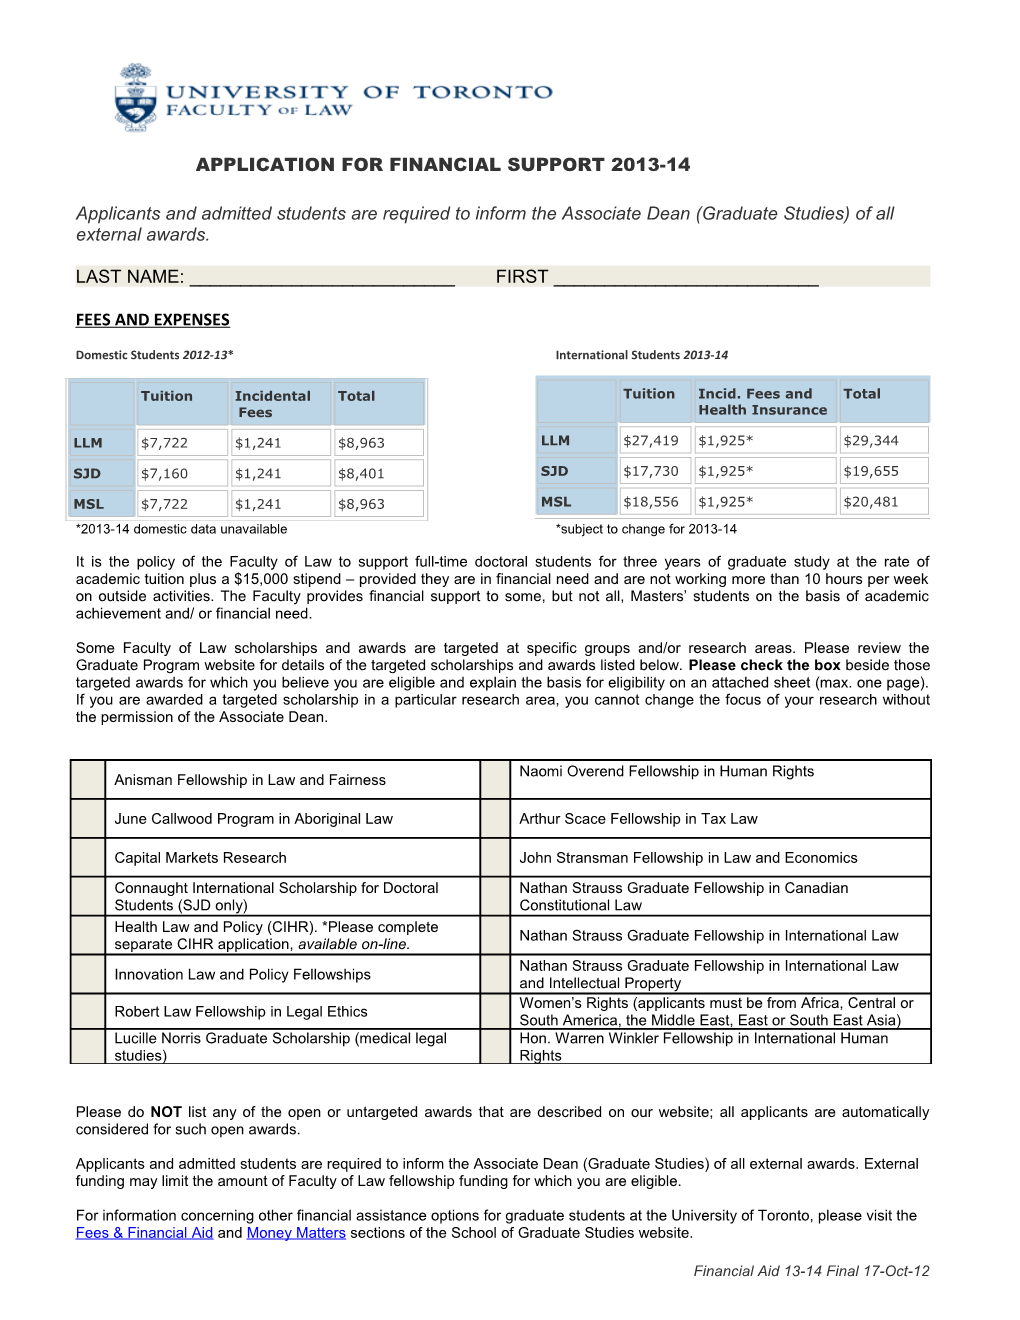 Application for Financial Support 2013-14